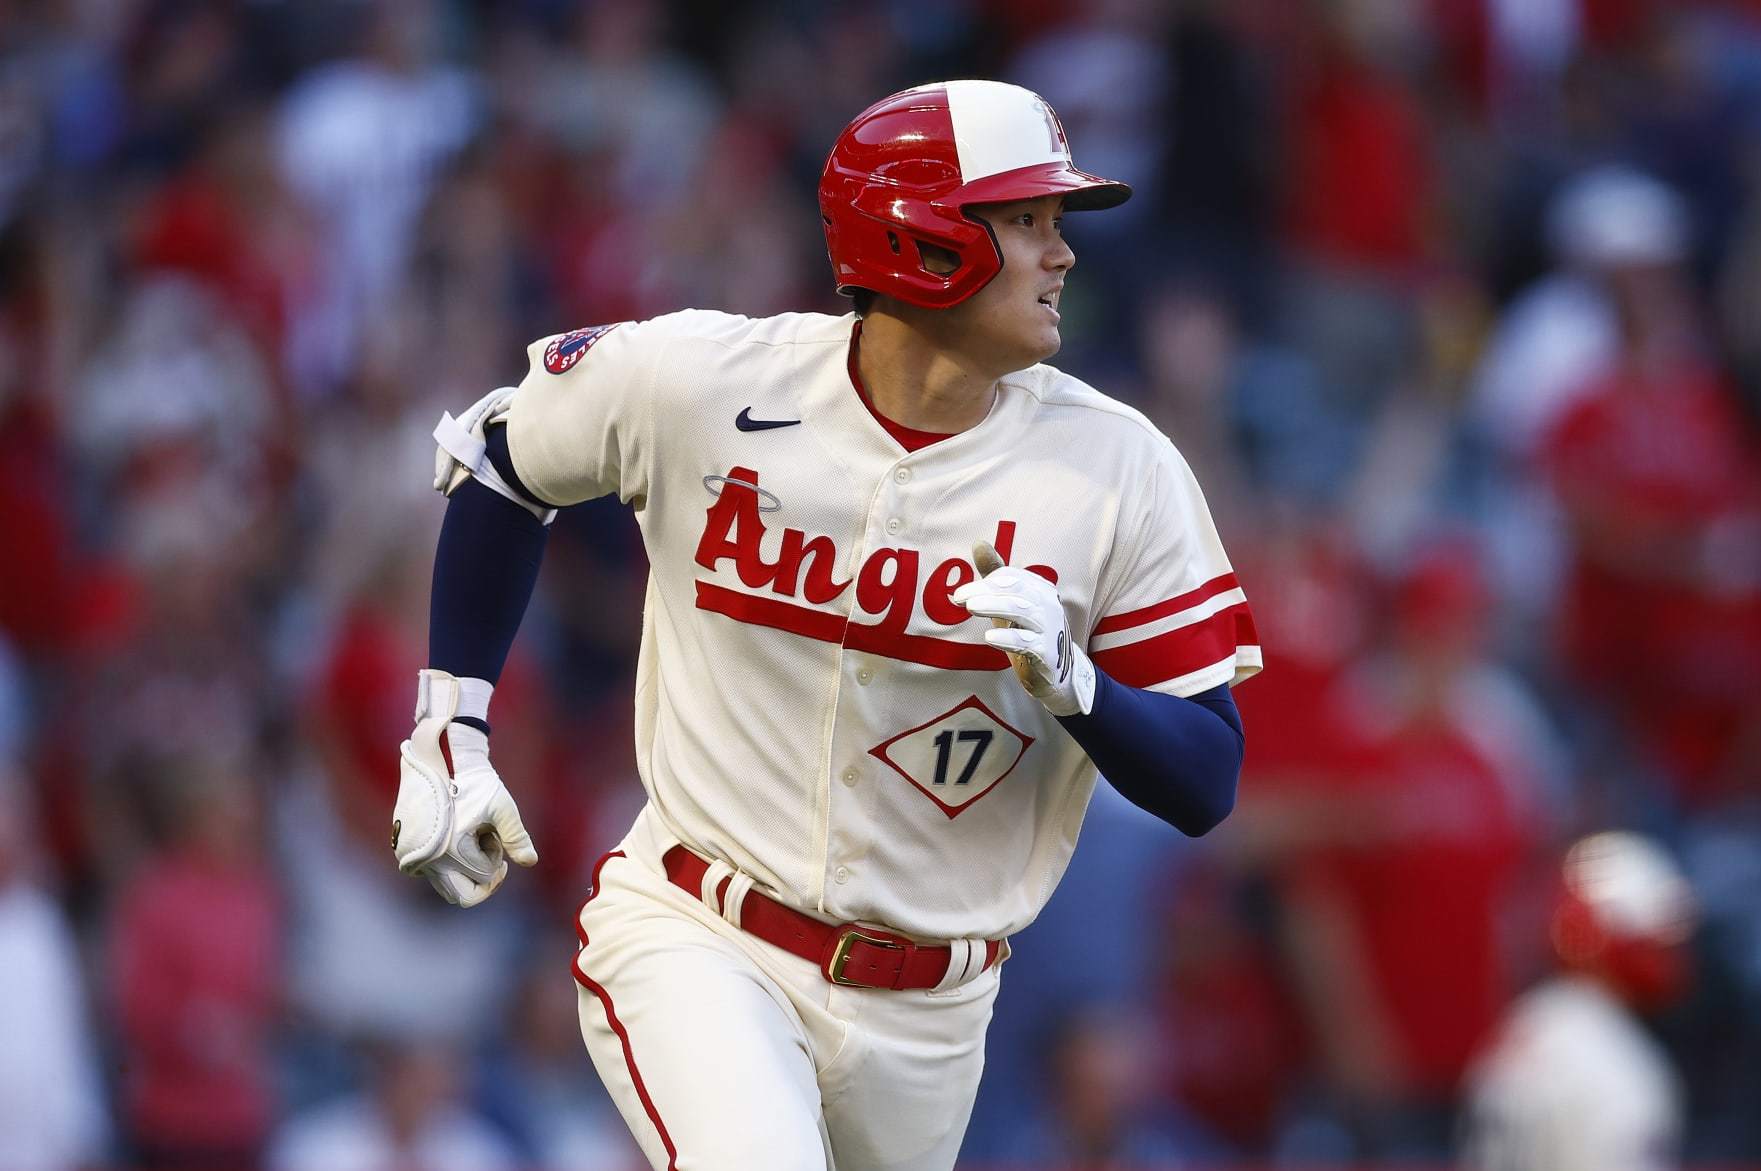 Angels acquire notable outfield slugger in trade with NL team